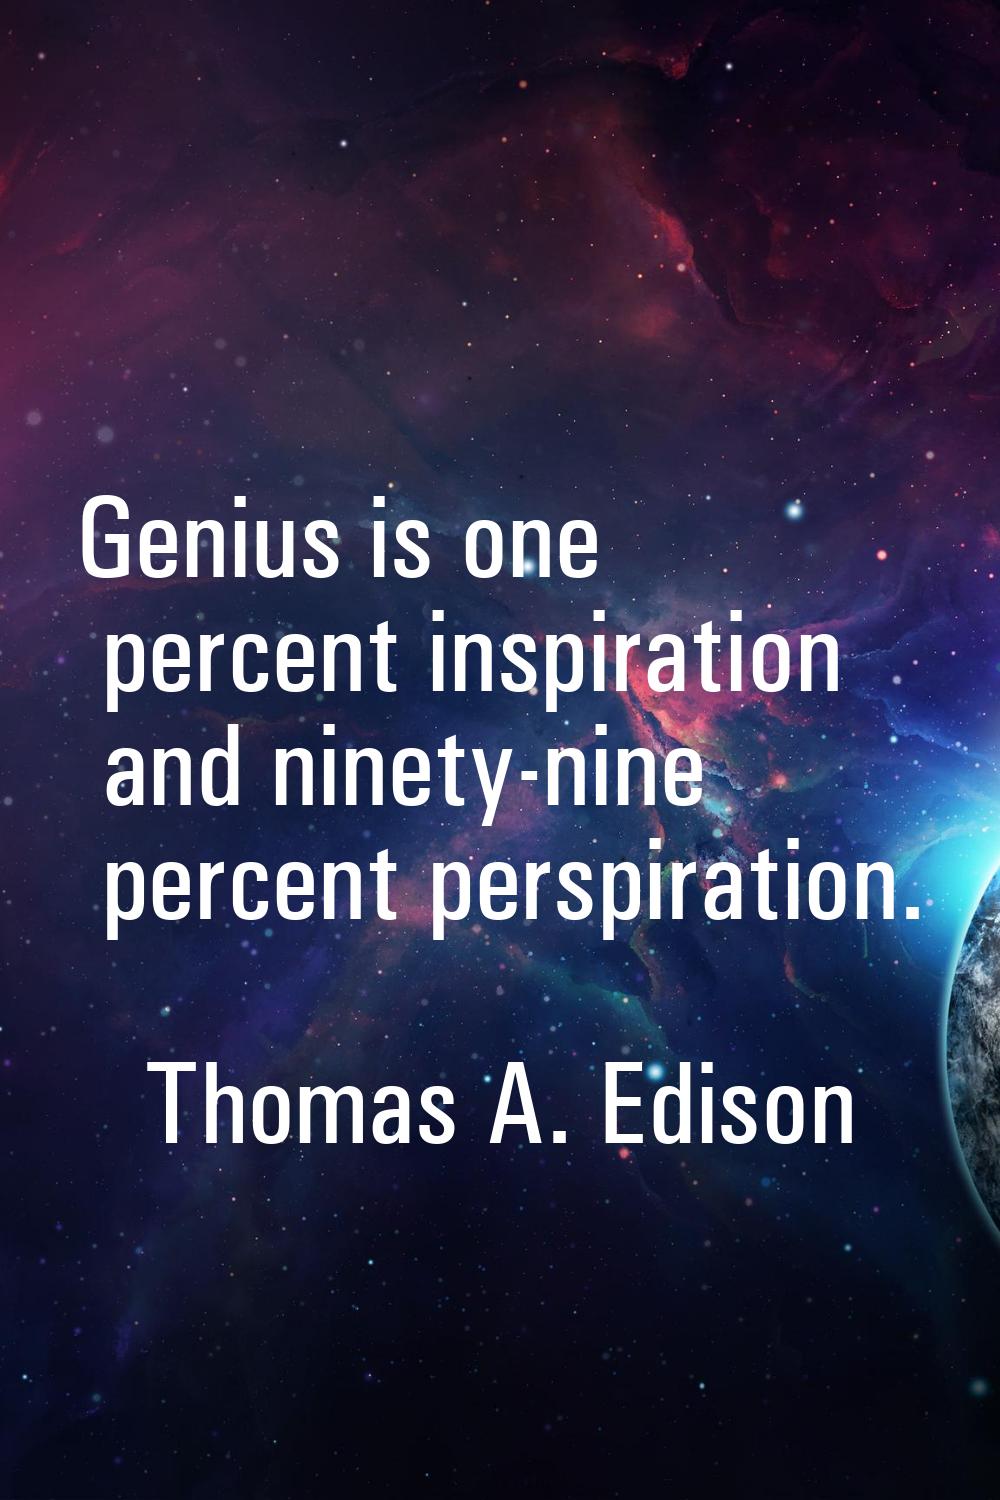 Genius is one percent inspiration and ninety-nine percent perspiration.